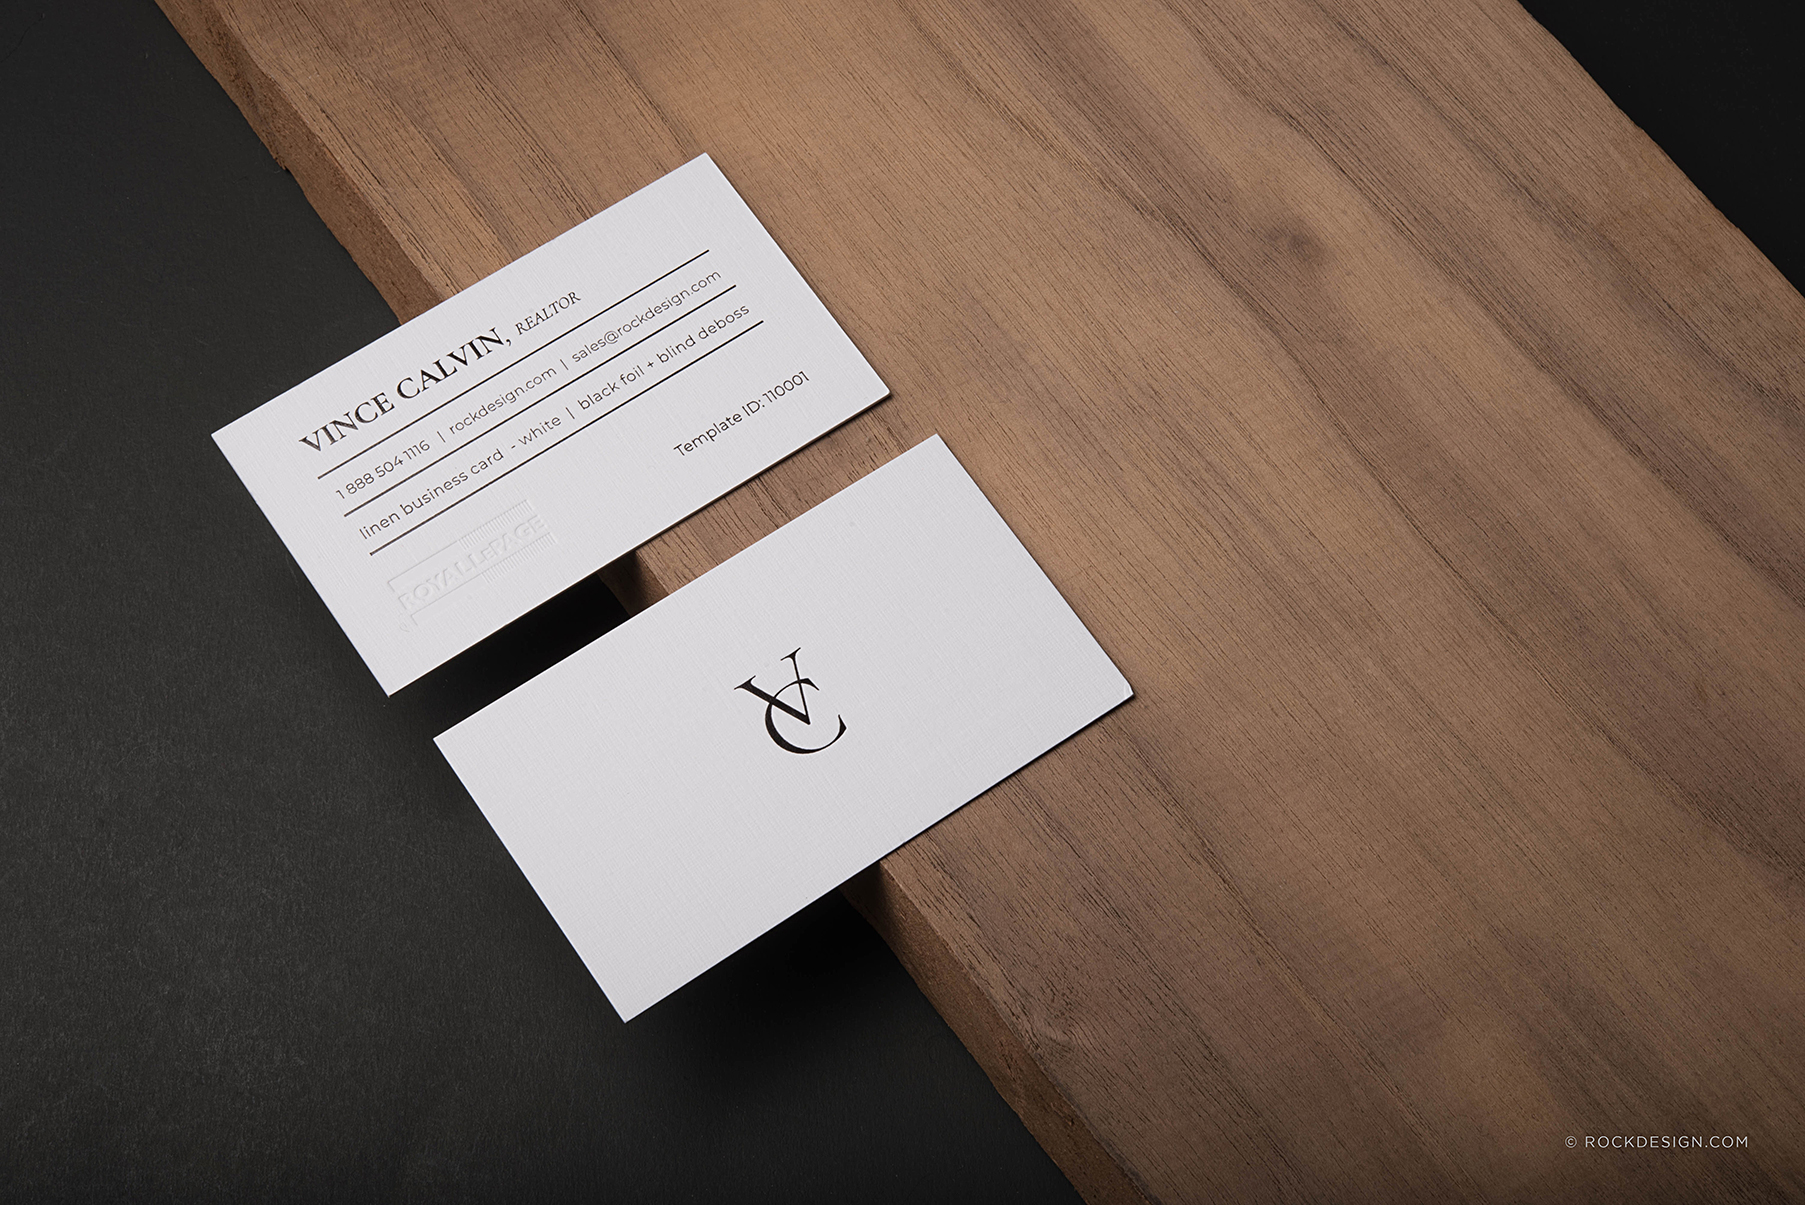 NP Design and Print on X: Louis Vuitton business cards printed on